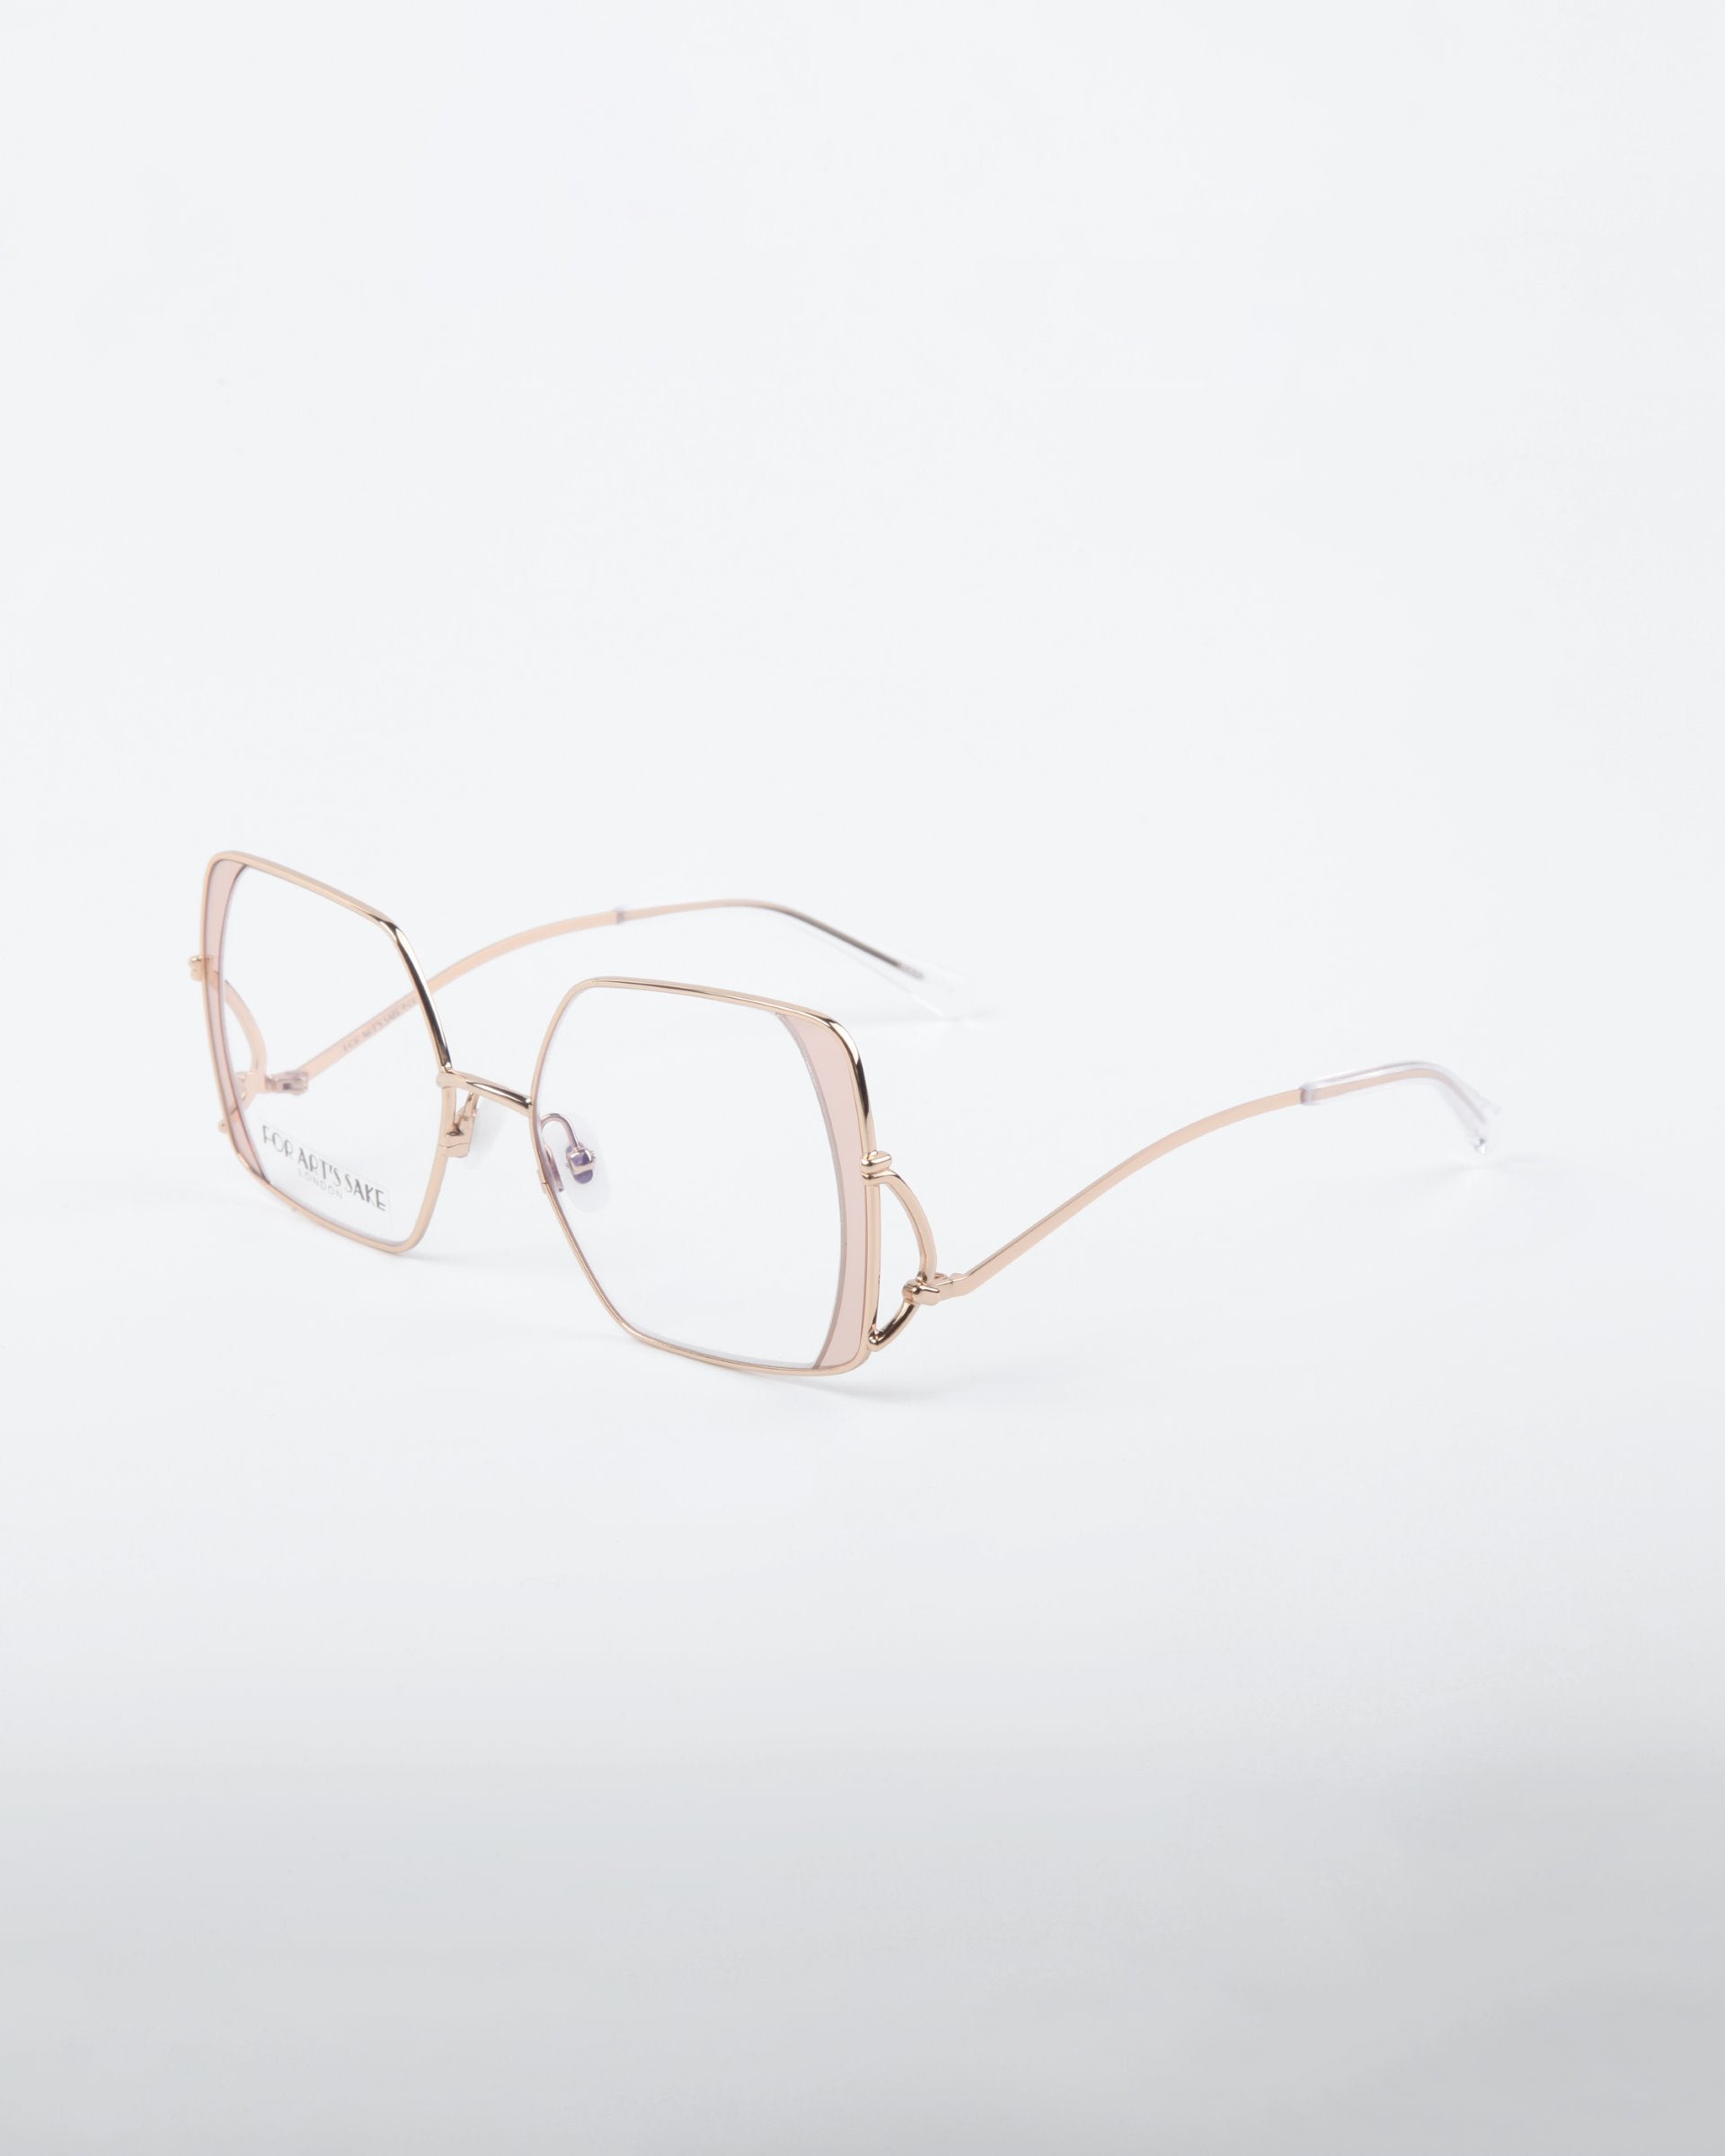 A pair of gold-rimmed, geometric eyeglasses with clear lenses is displayed on a plain white background. The Candy glasses from For Art's Sake® feature distinctive angular frames, thin, delicate arms, and are crafted from high-quality stainless steel.